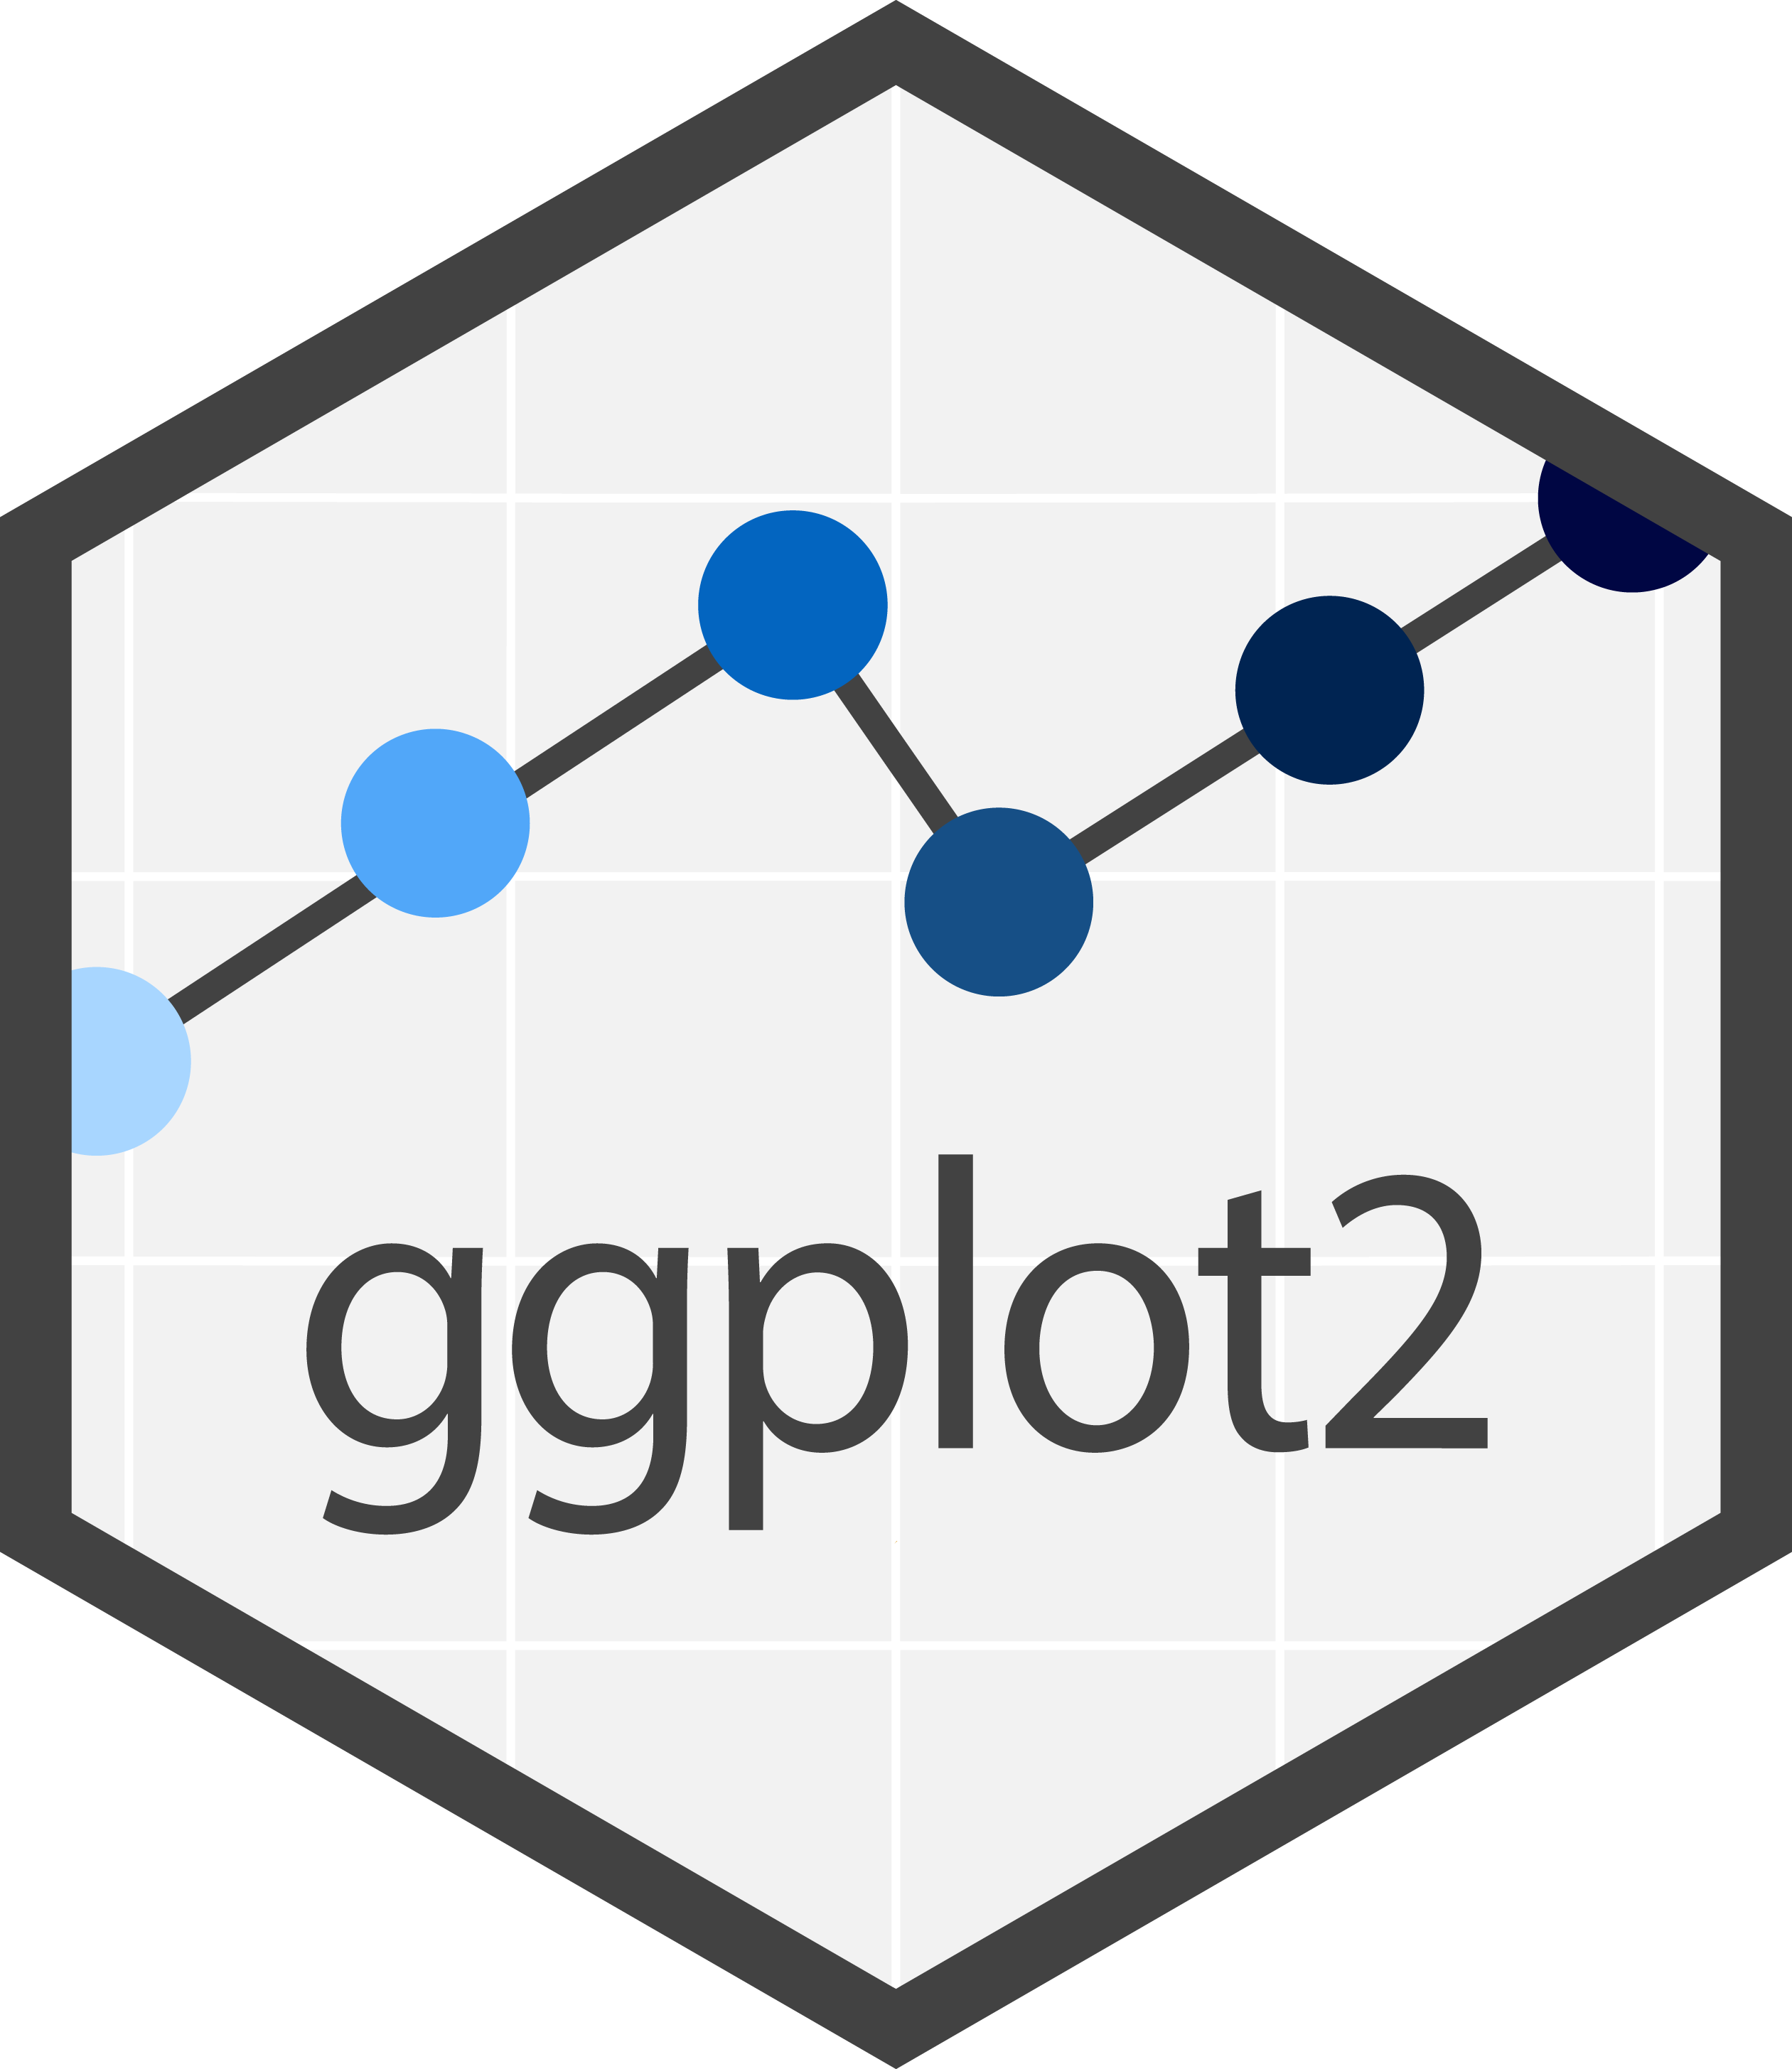 The {ggplot2} hex sticker which features a connected scatterplot with data points in varying shades of blue atop a gray gridded background. The word 'ggplot2' sits beneath the data.